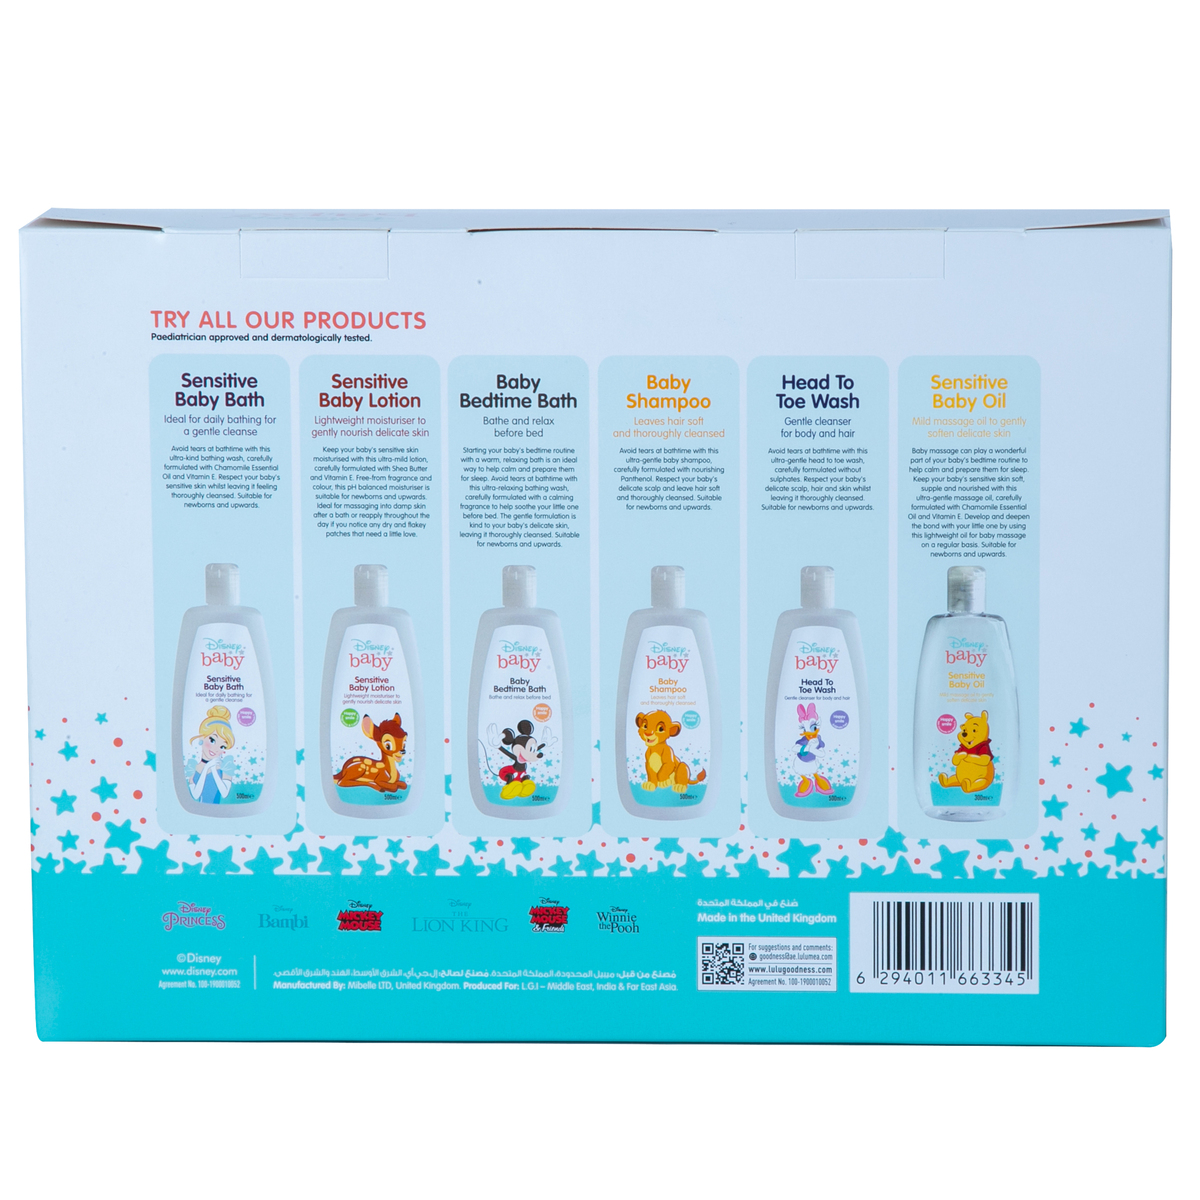 Disney Baby Care Assorted Gift Pack 3 pcs Set